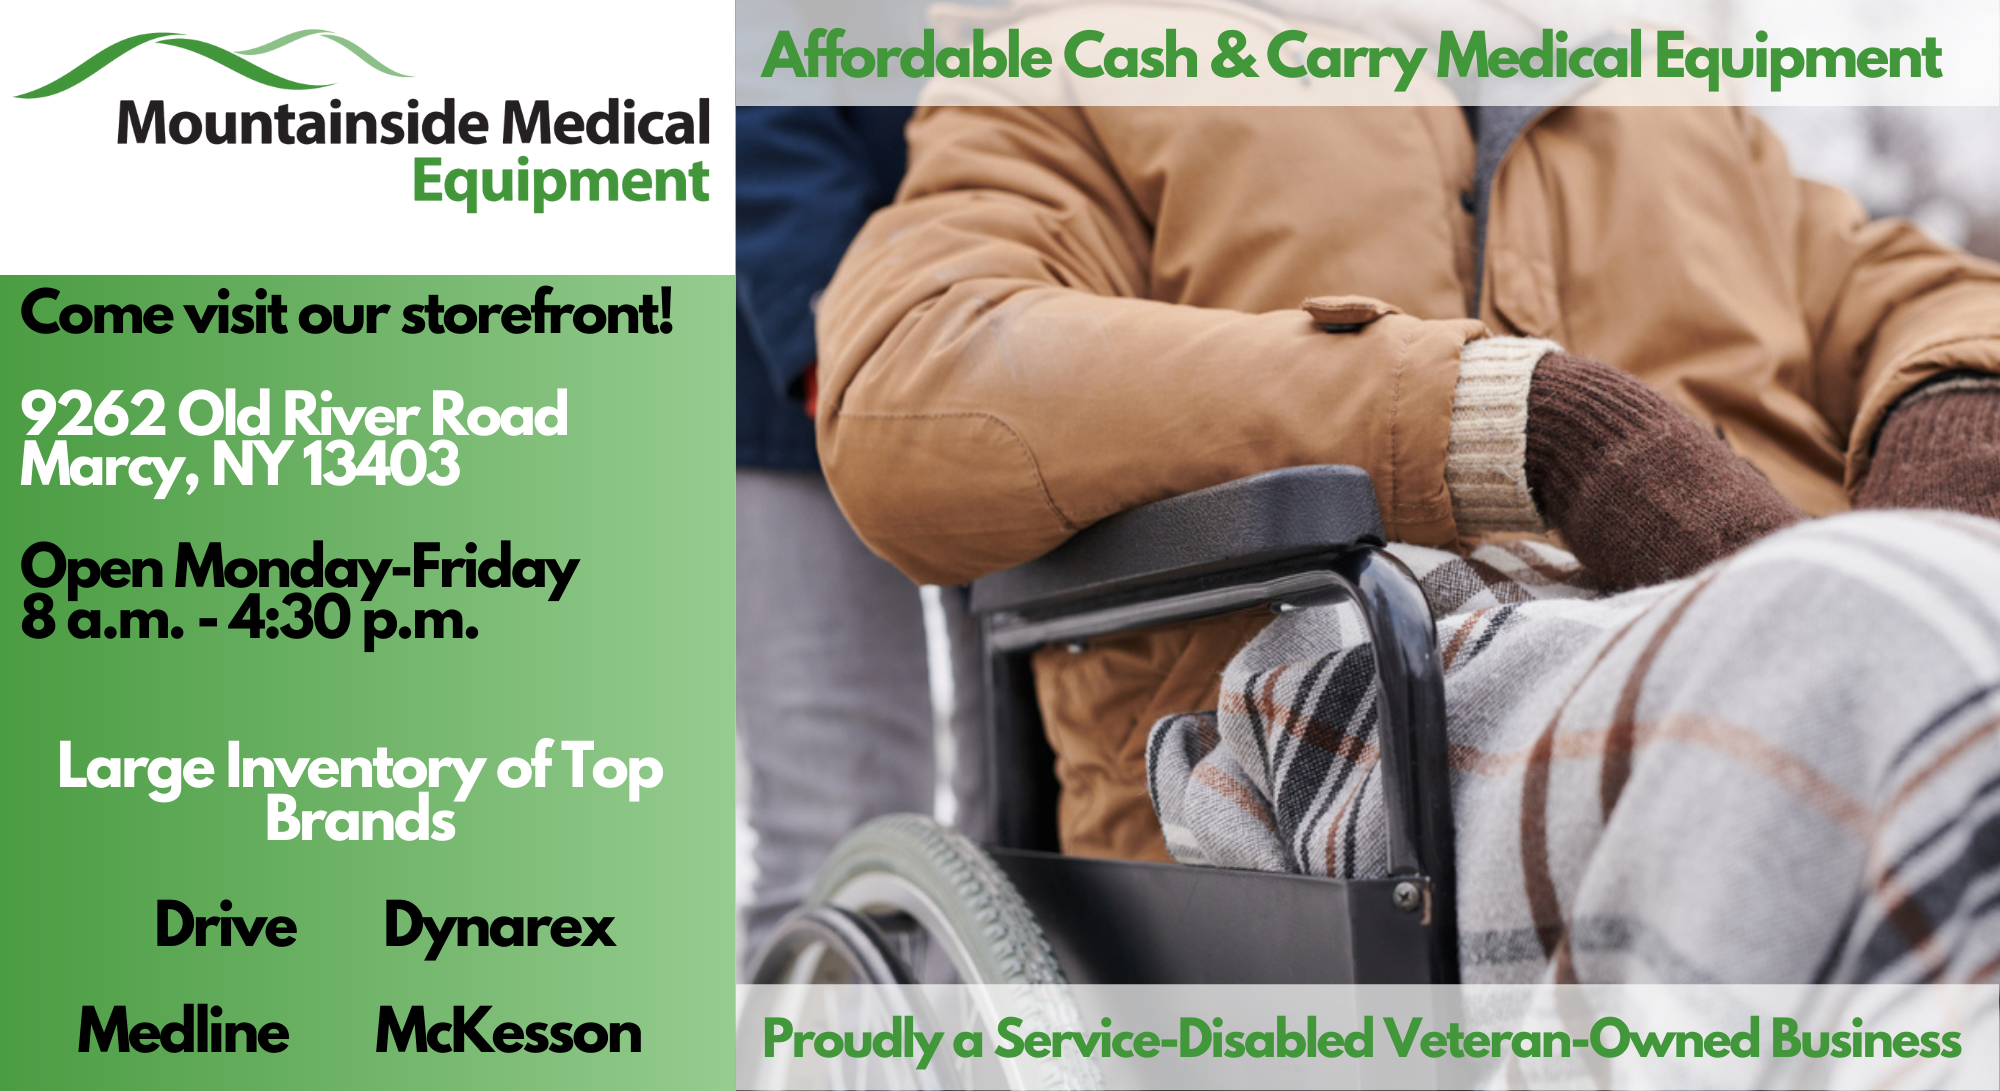 The Best Mobility, Assistive, and Ambulatory Devices Available at Mountainside Medical Equipment